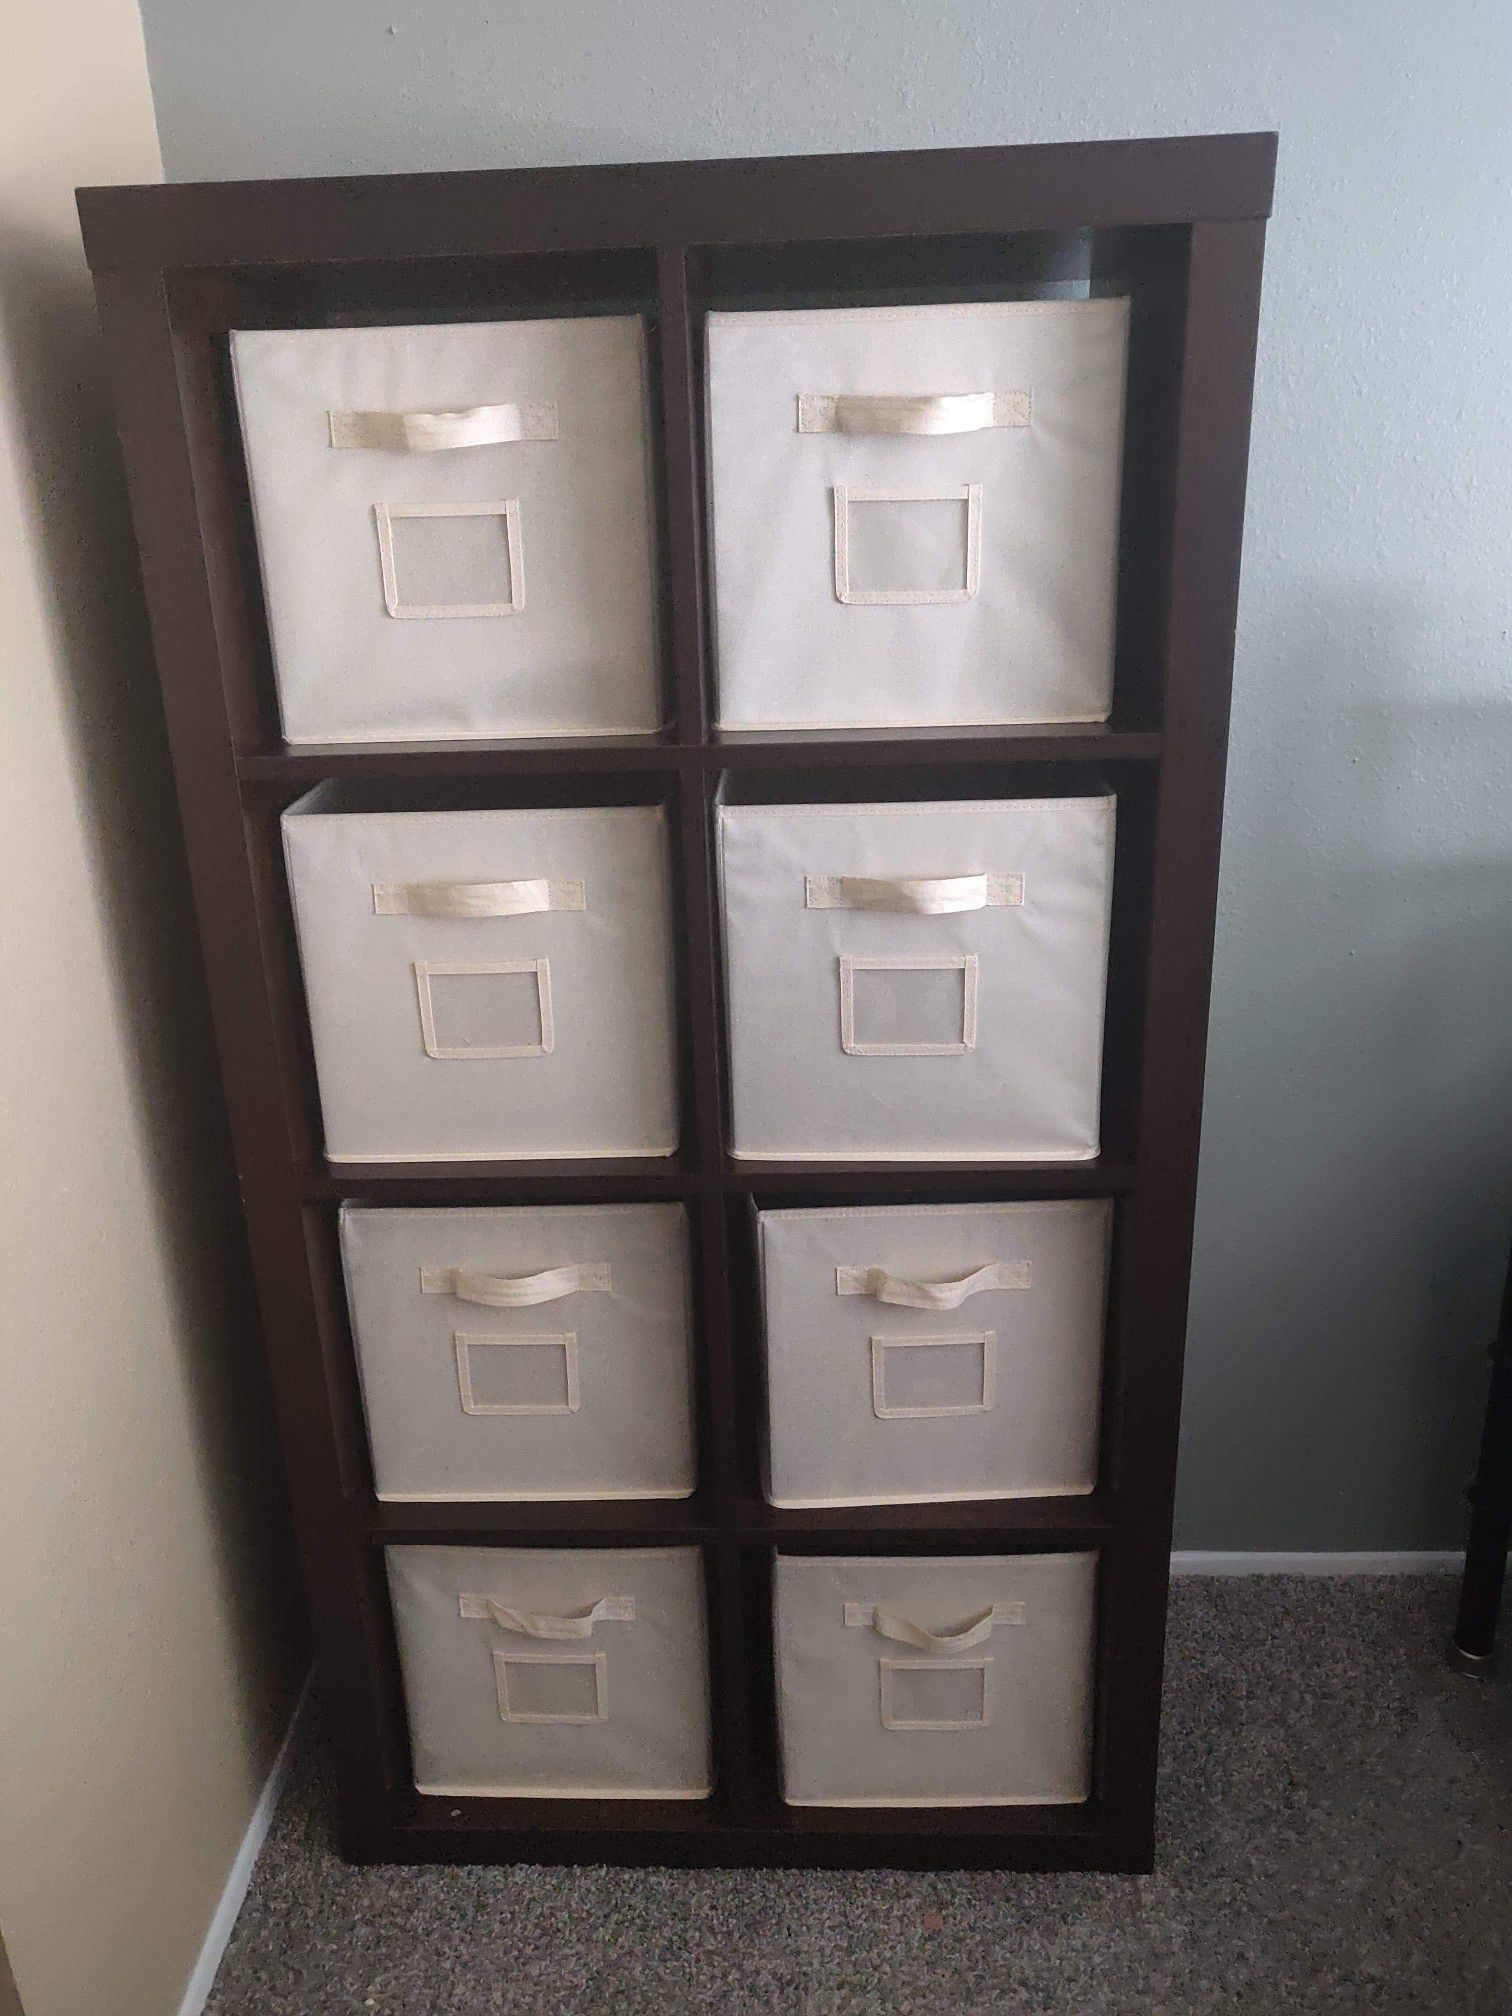 Tall dresser with pullout bins